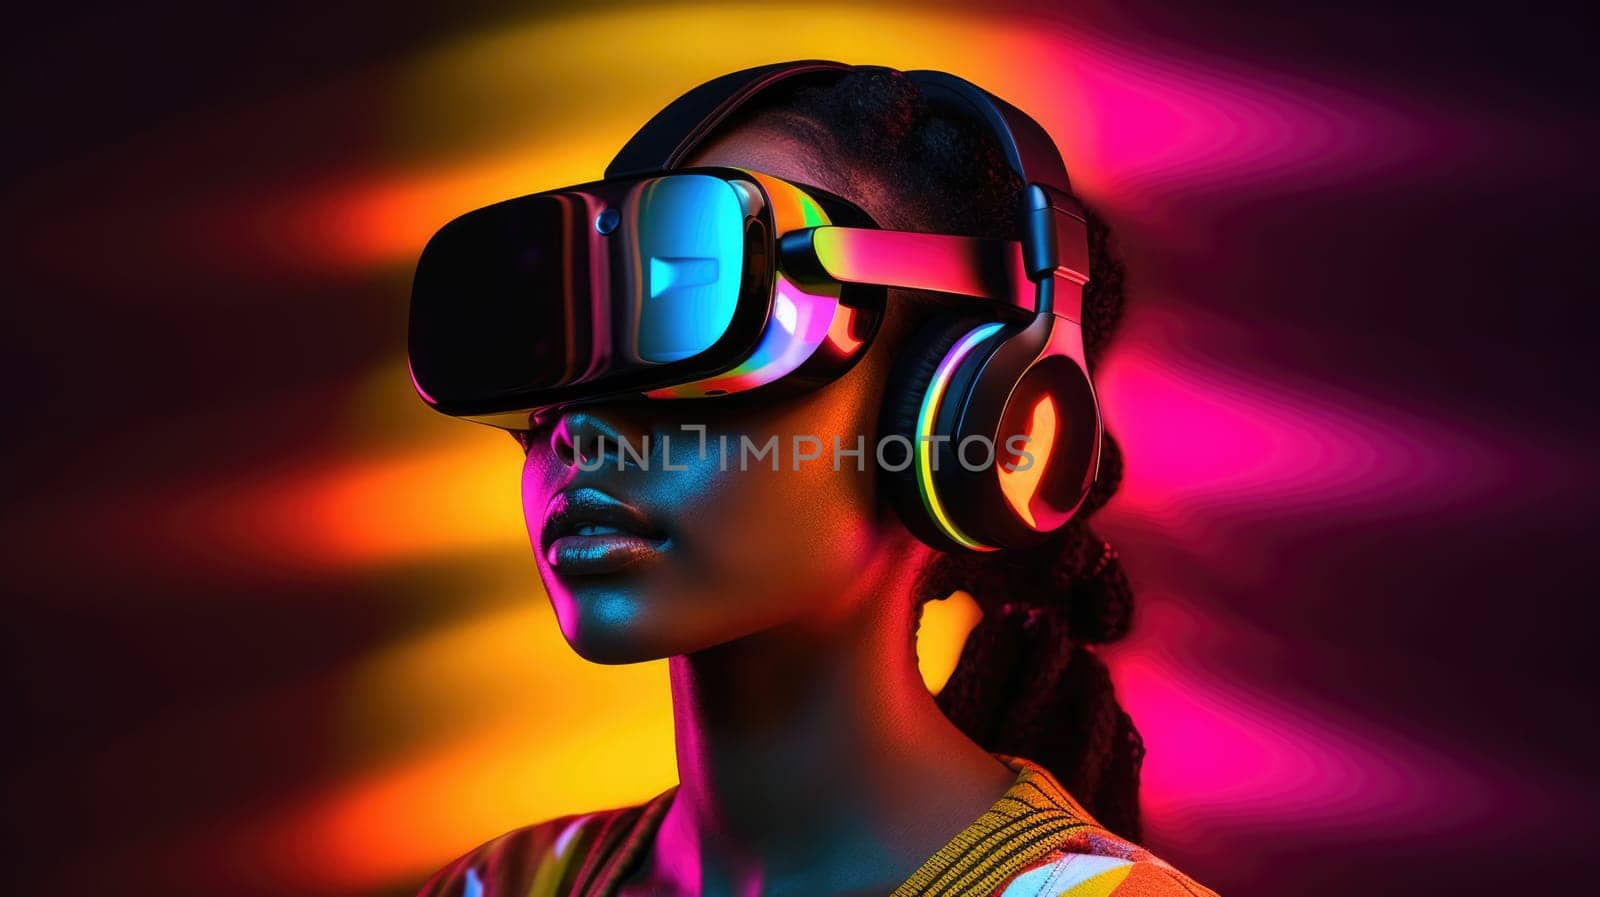 Beautiful model with colorful and trendy outfit with glowing light. Picturesque by biancoblue